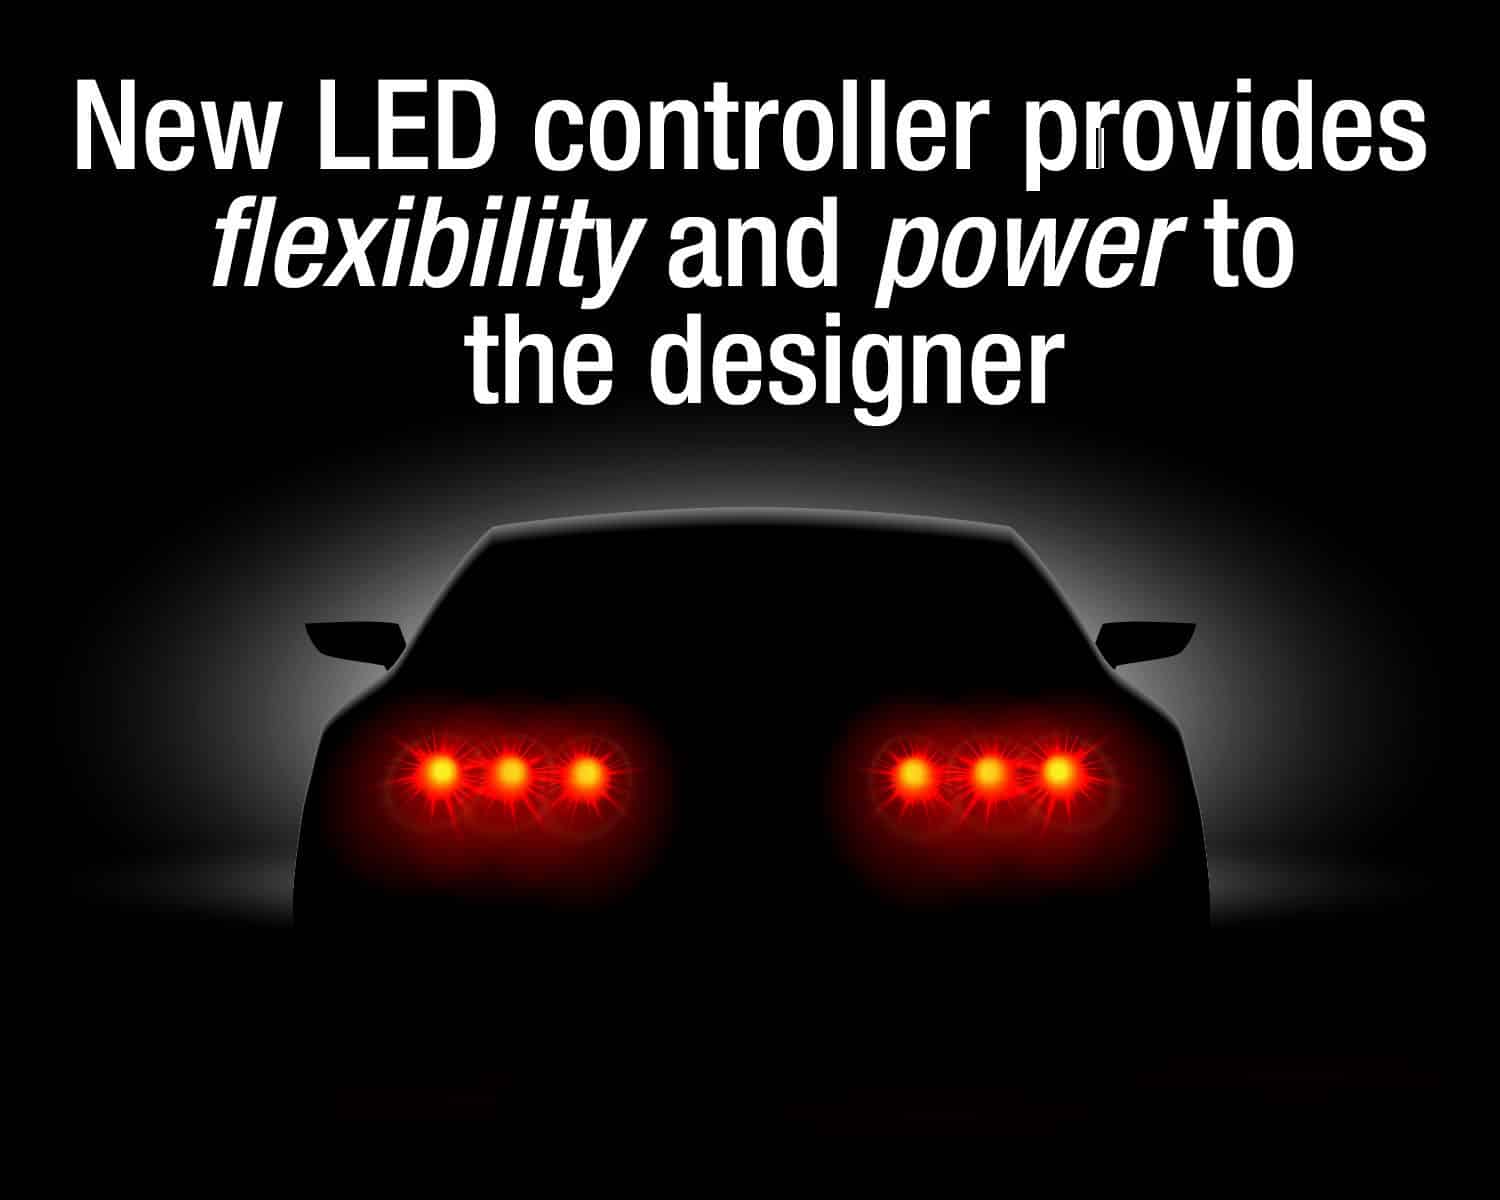 New Automotive LED Lighting Controller Puts the Power in Designers’ Hands